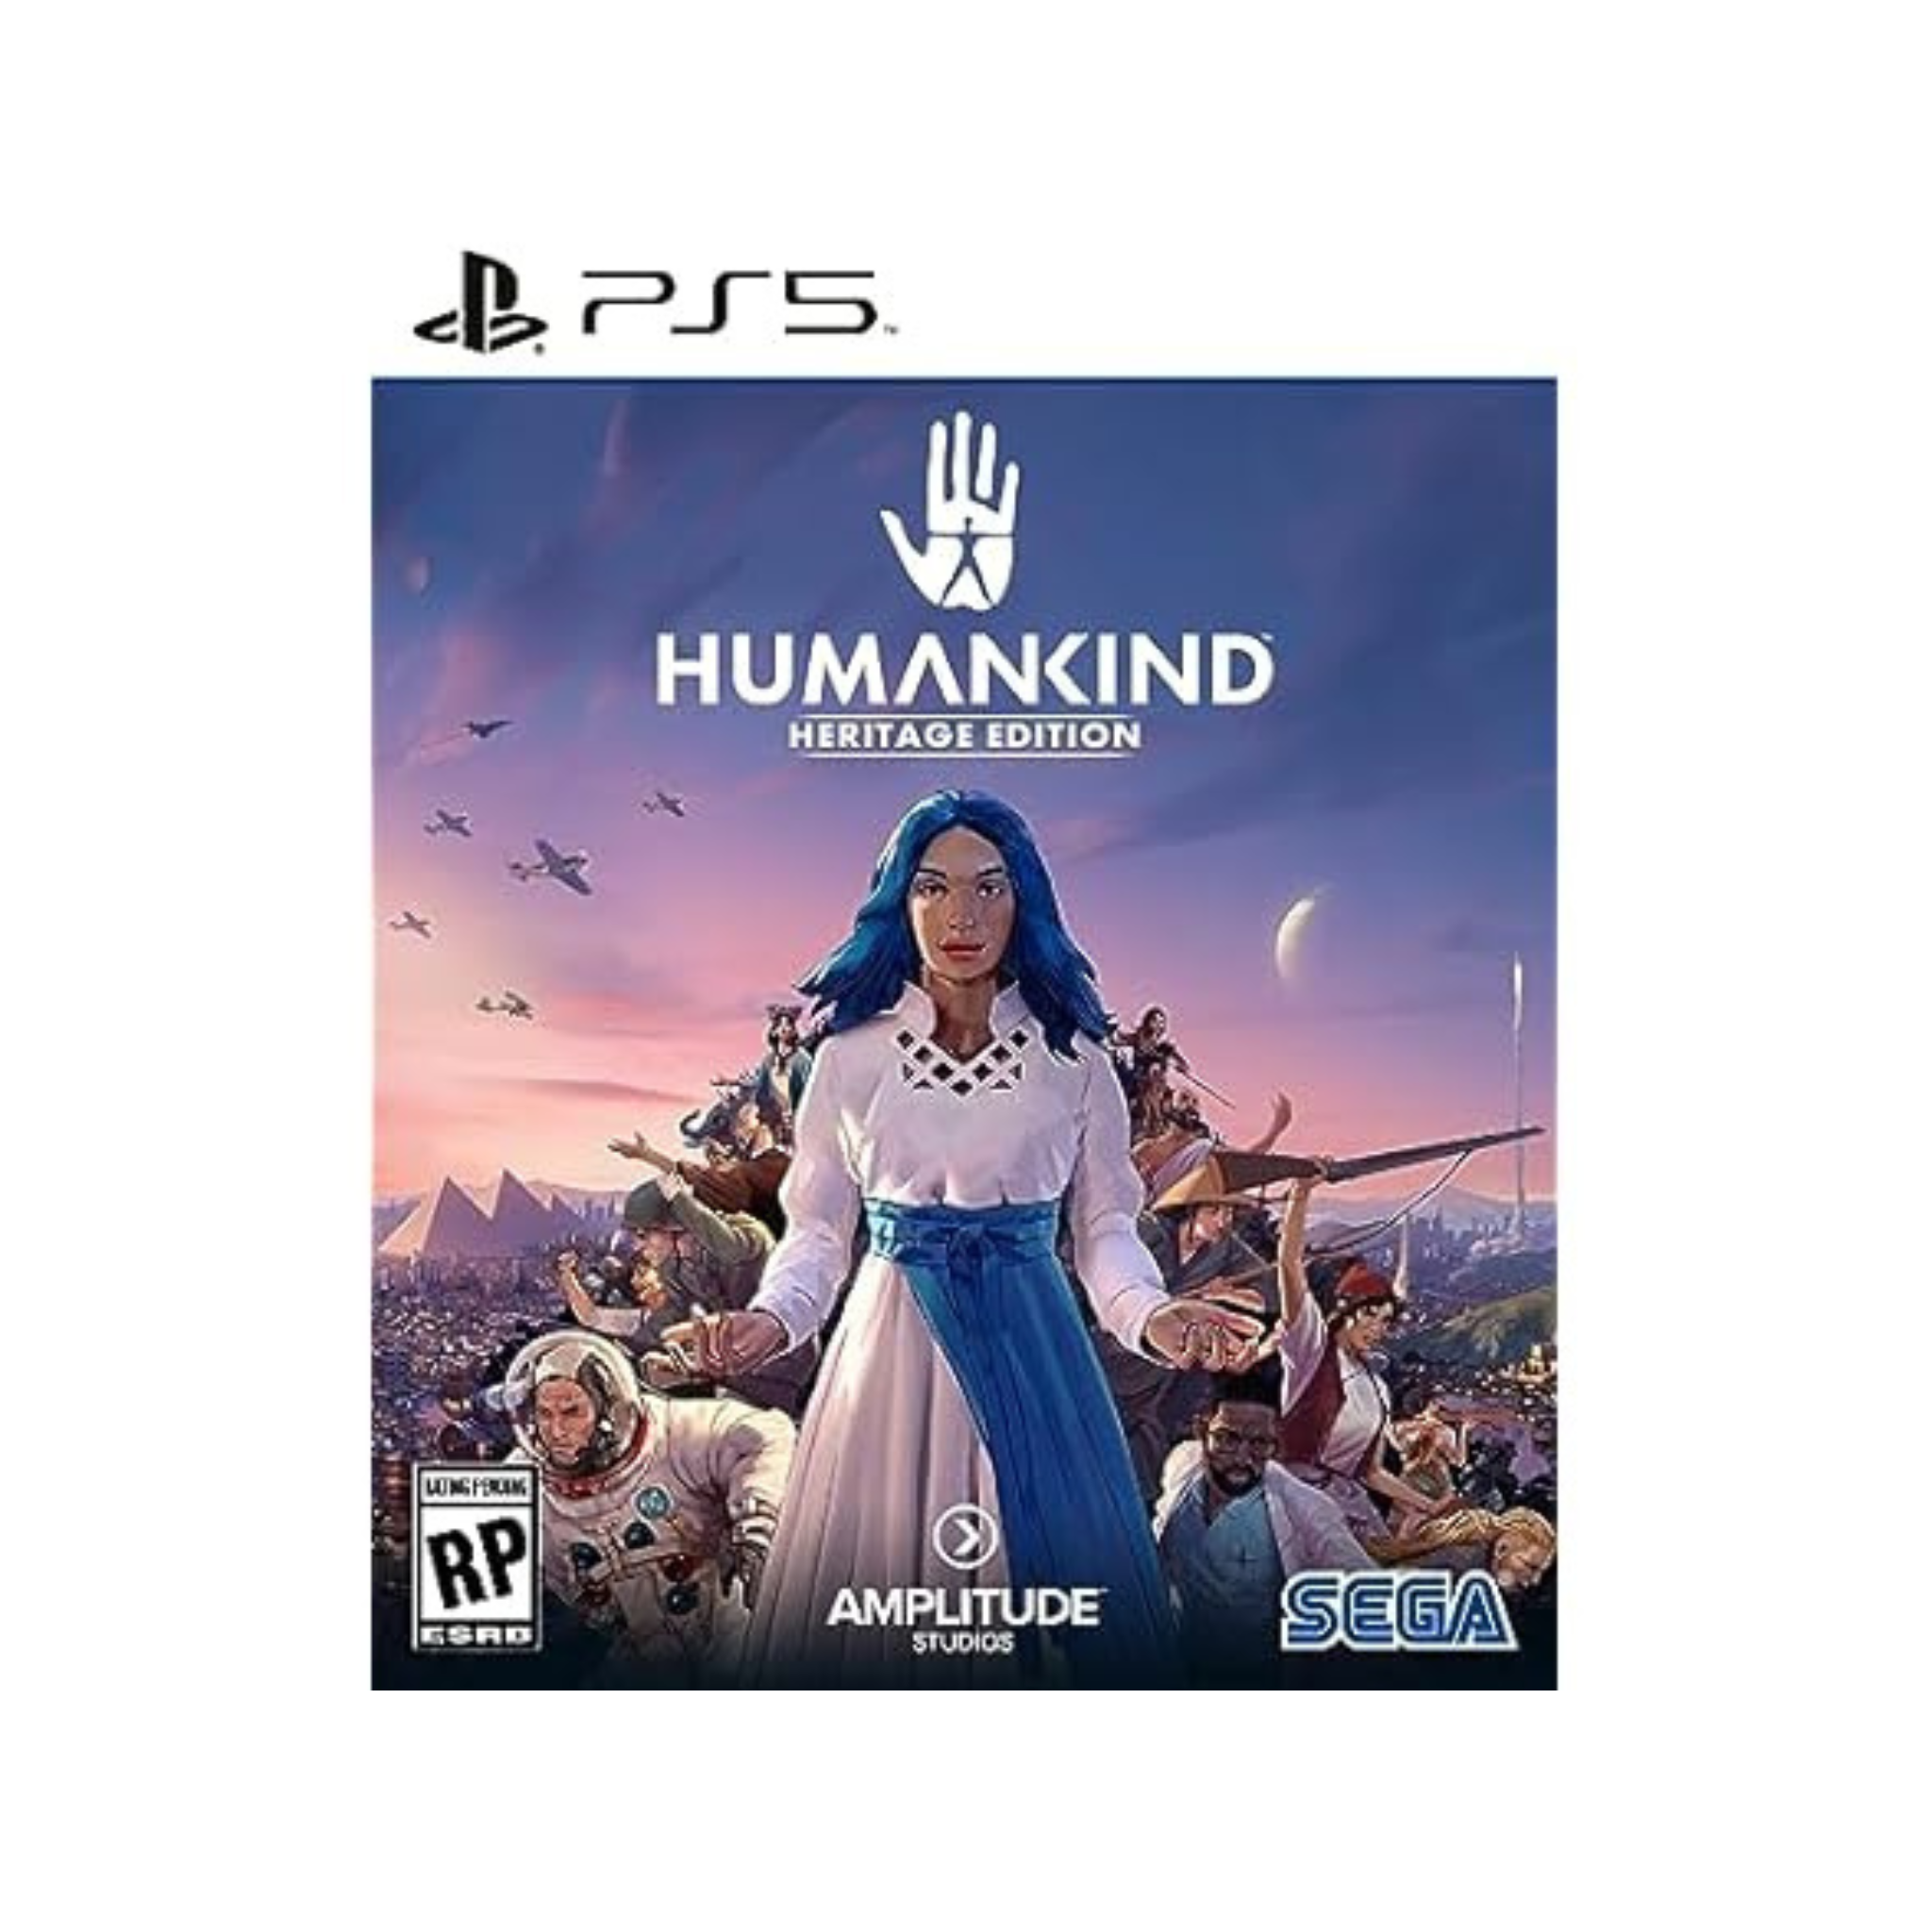 Humankind: Heritage Edition for PS5